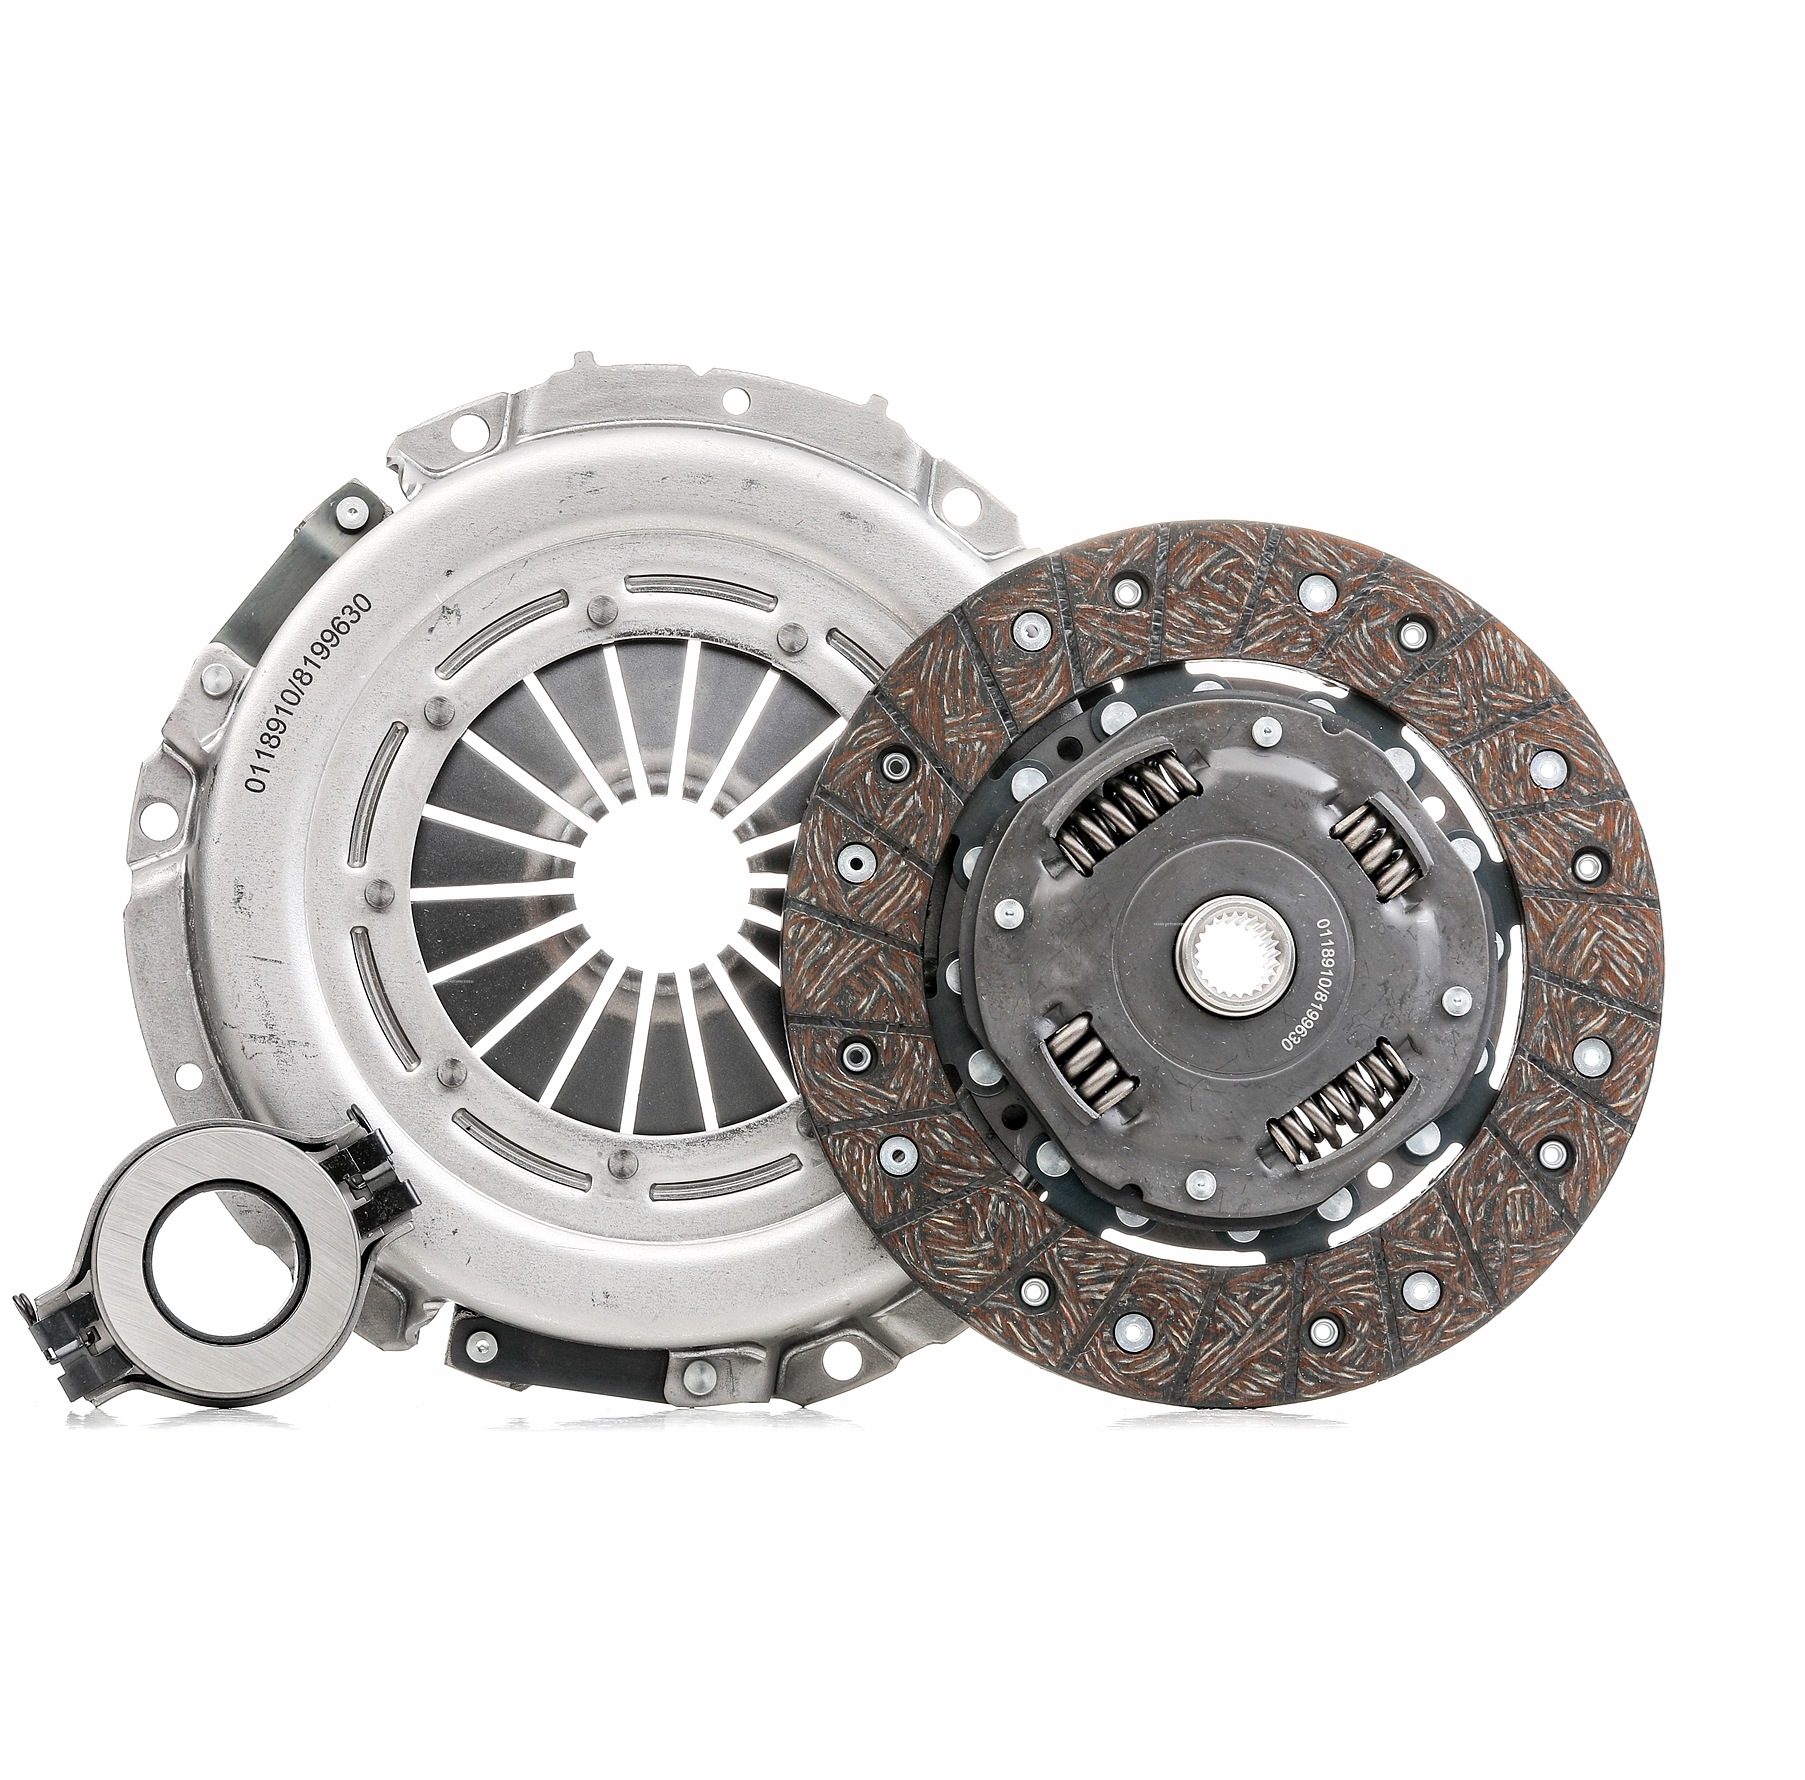 STARK SKCK-0100228 Clutch kit three-piece, with clutch release bearing